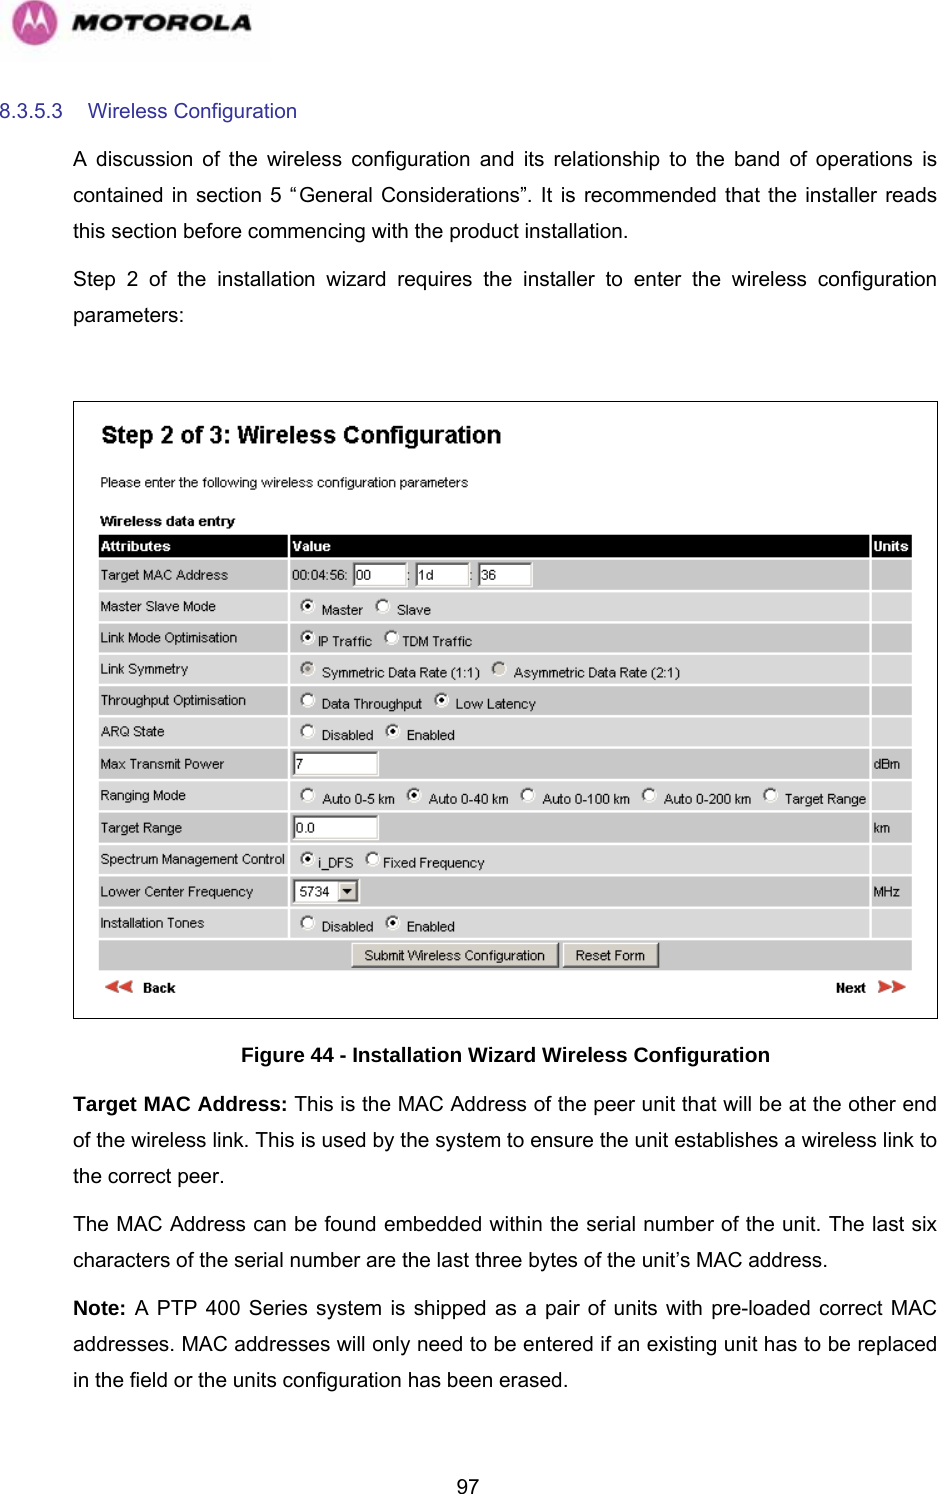   978.3.5.3  Wireless Configuration  A discussion of the wireless configuration and its relationship to the band of operations is contained in section 5 “General Considerations”. It is recommended that the installer reads this section before commencing with the product installation. Step 2 of the installation wizard requires the installer to enter the wireless configuration parameters:   Figure 44 - Installation Wizard Wireless Configuration Target MAC Address: This is the MAC Address of the peer unit that will be at the other end of the wireless link. This is used by the system to ensure the unit establishes a wireless link to the correct peer.  The MAC Address can be found embedded within the serial number of the unit. The last six characters of the serial number are the last three bytes of the unit’s MAC address. Note: A PTP 400 Series system is shipped as a pair of units with pre-loaded correct MAC addresses. MAC addresses will only need to be entered if an existing unit has to be replaced in the field or the units configuration has been erased. 